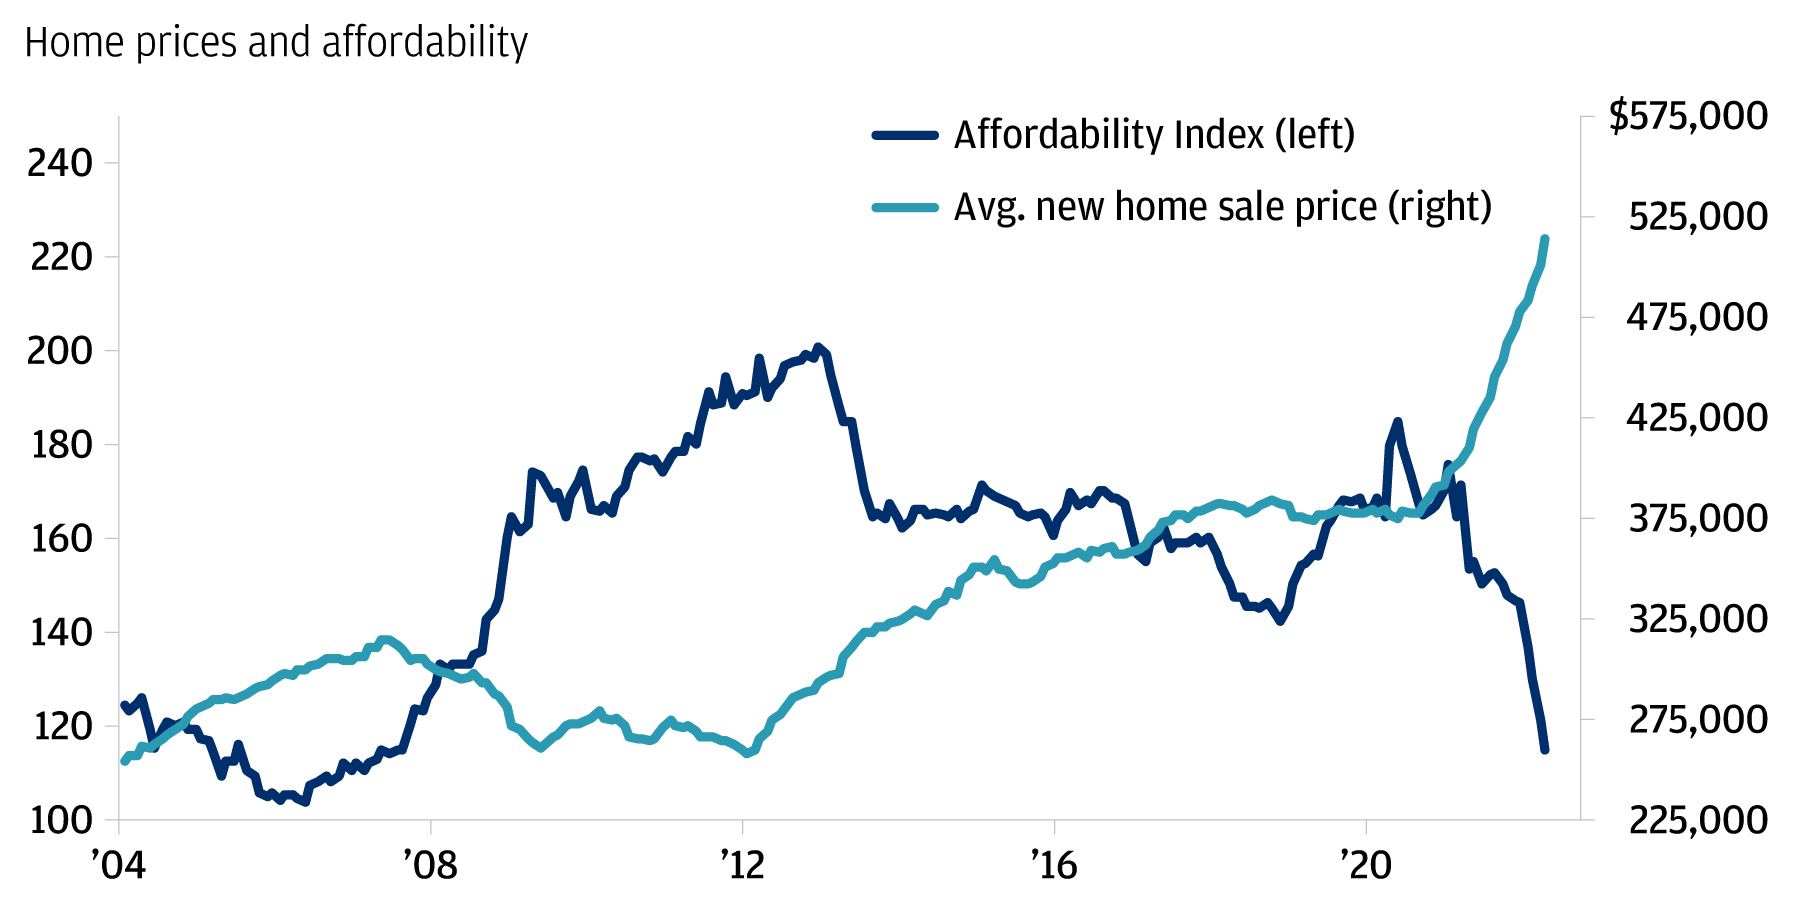 This chart shows the Affordability Index and average new home sale price in the U.S. from 2004 to 2022.